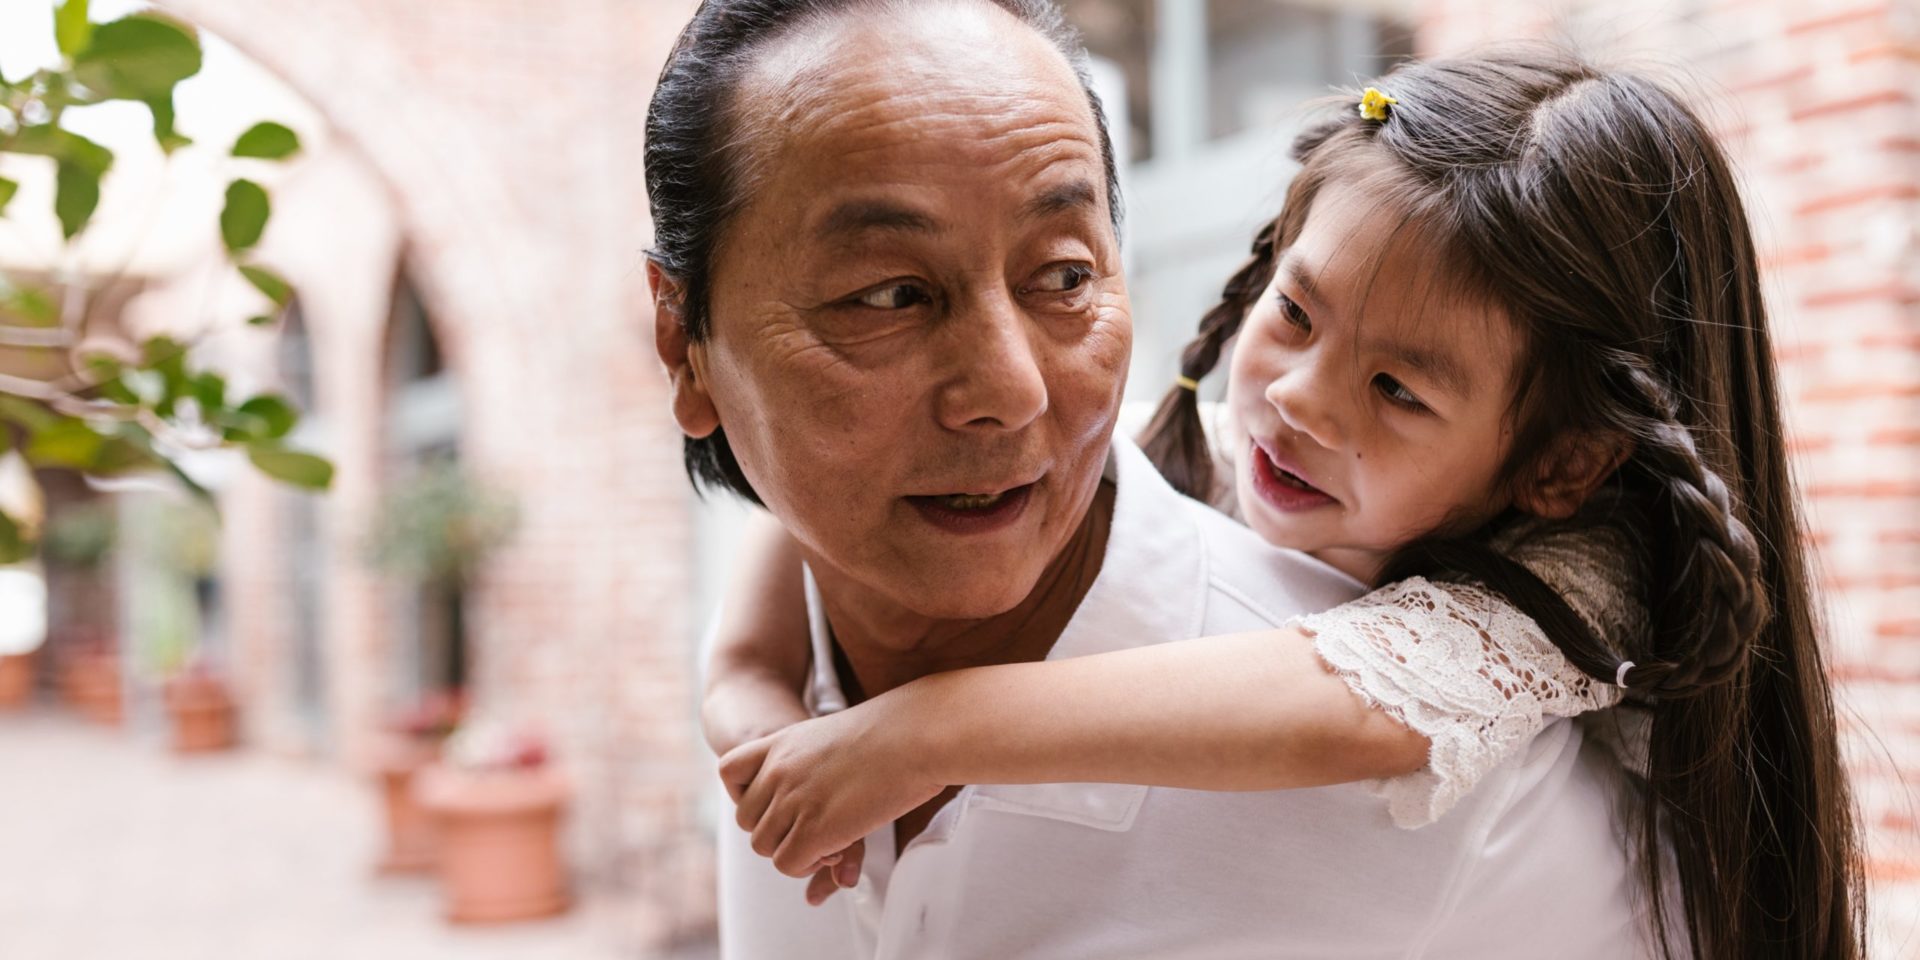 Grandfather and granddaughter representing our there can be appropriate boundaries within Asian American households to form closer bonds and have healthier mental health in the Los Angeles, California area.